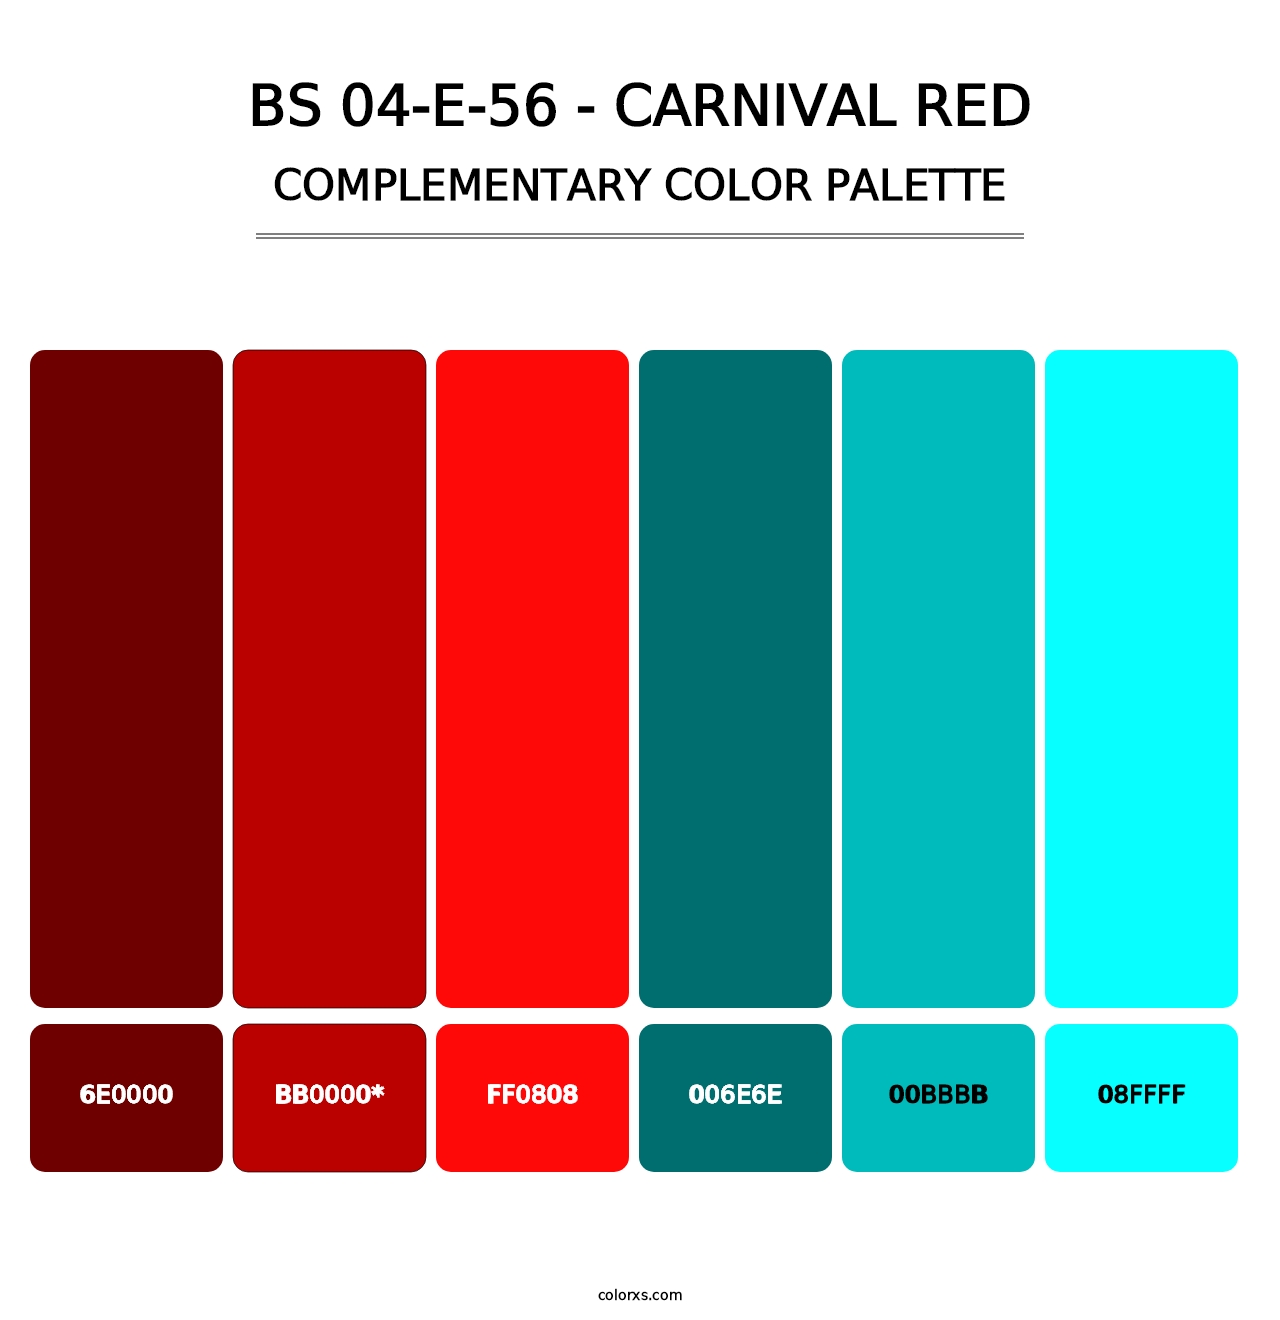 BS 04-E-56 - Carnival Red - Complementary Color Palette